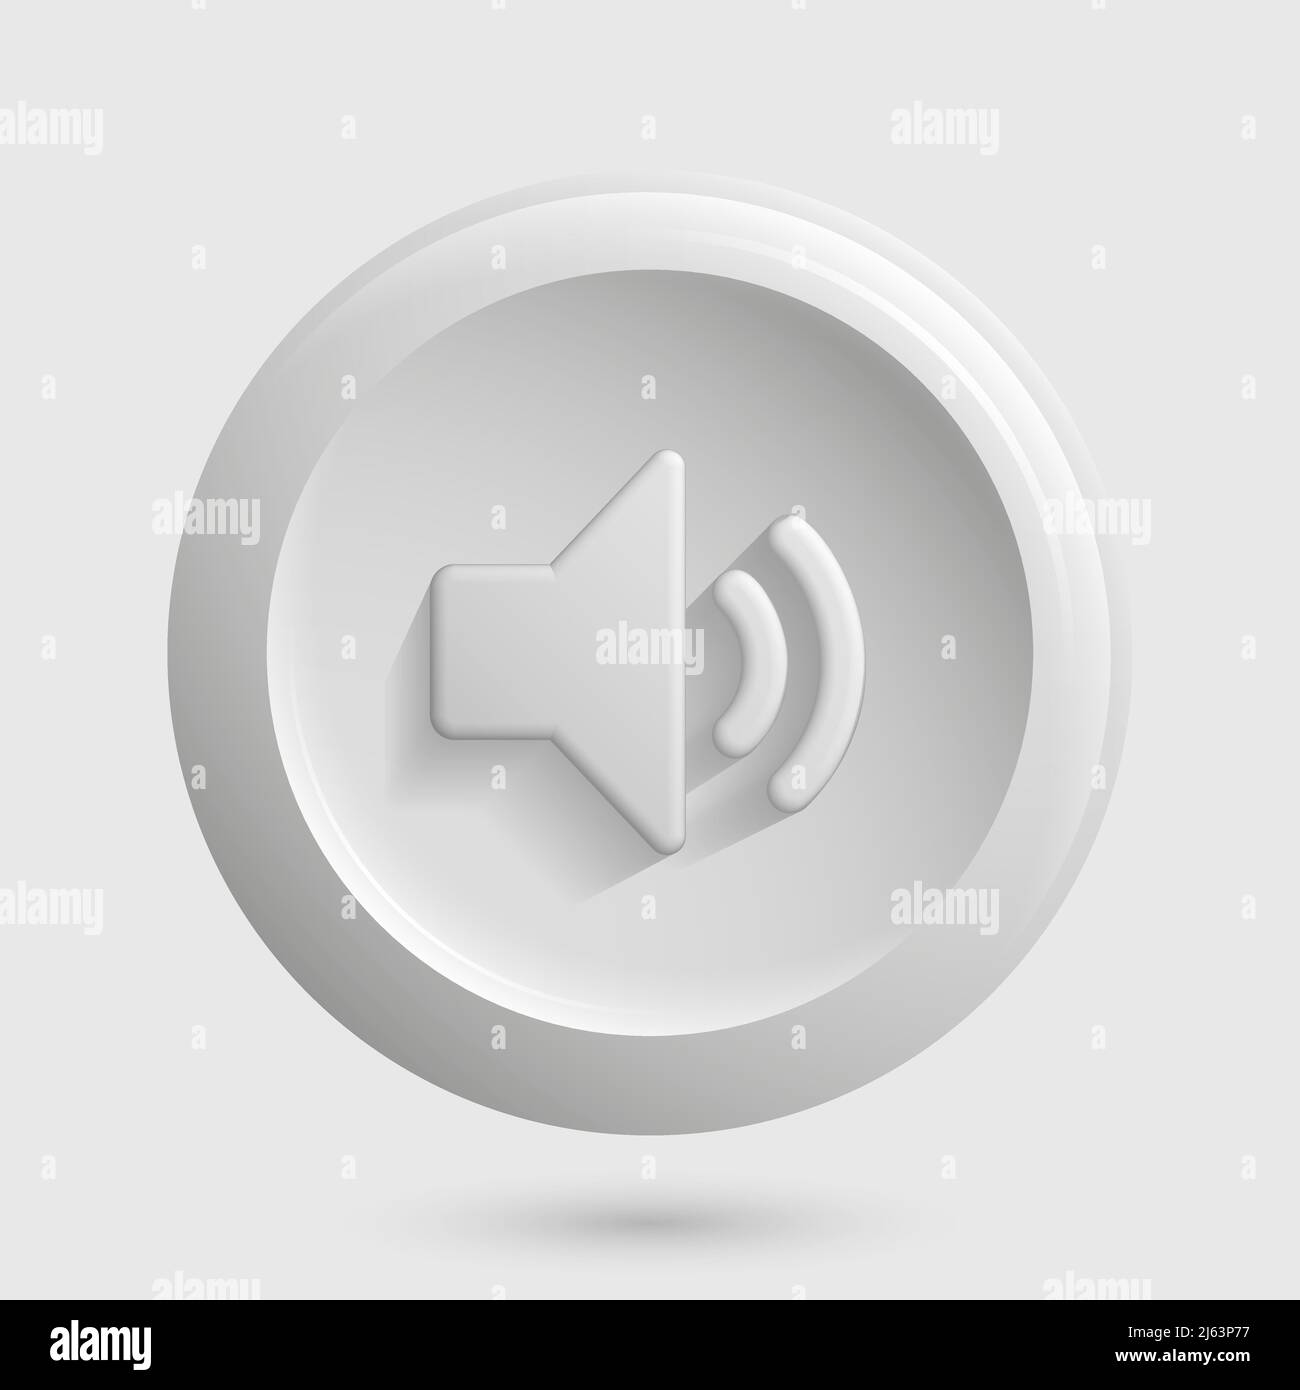 White Sound On Isolated Round Icon. Vector illustration Stock Vector